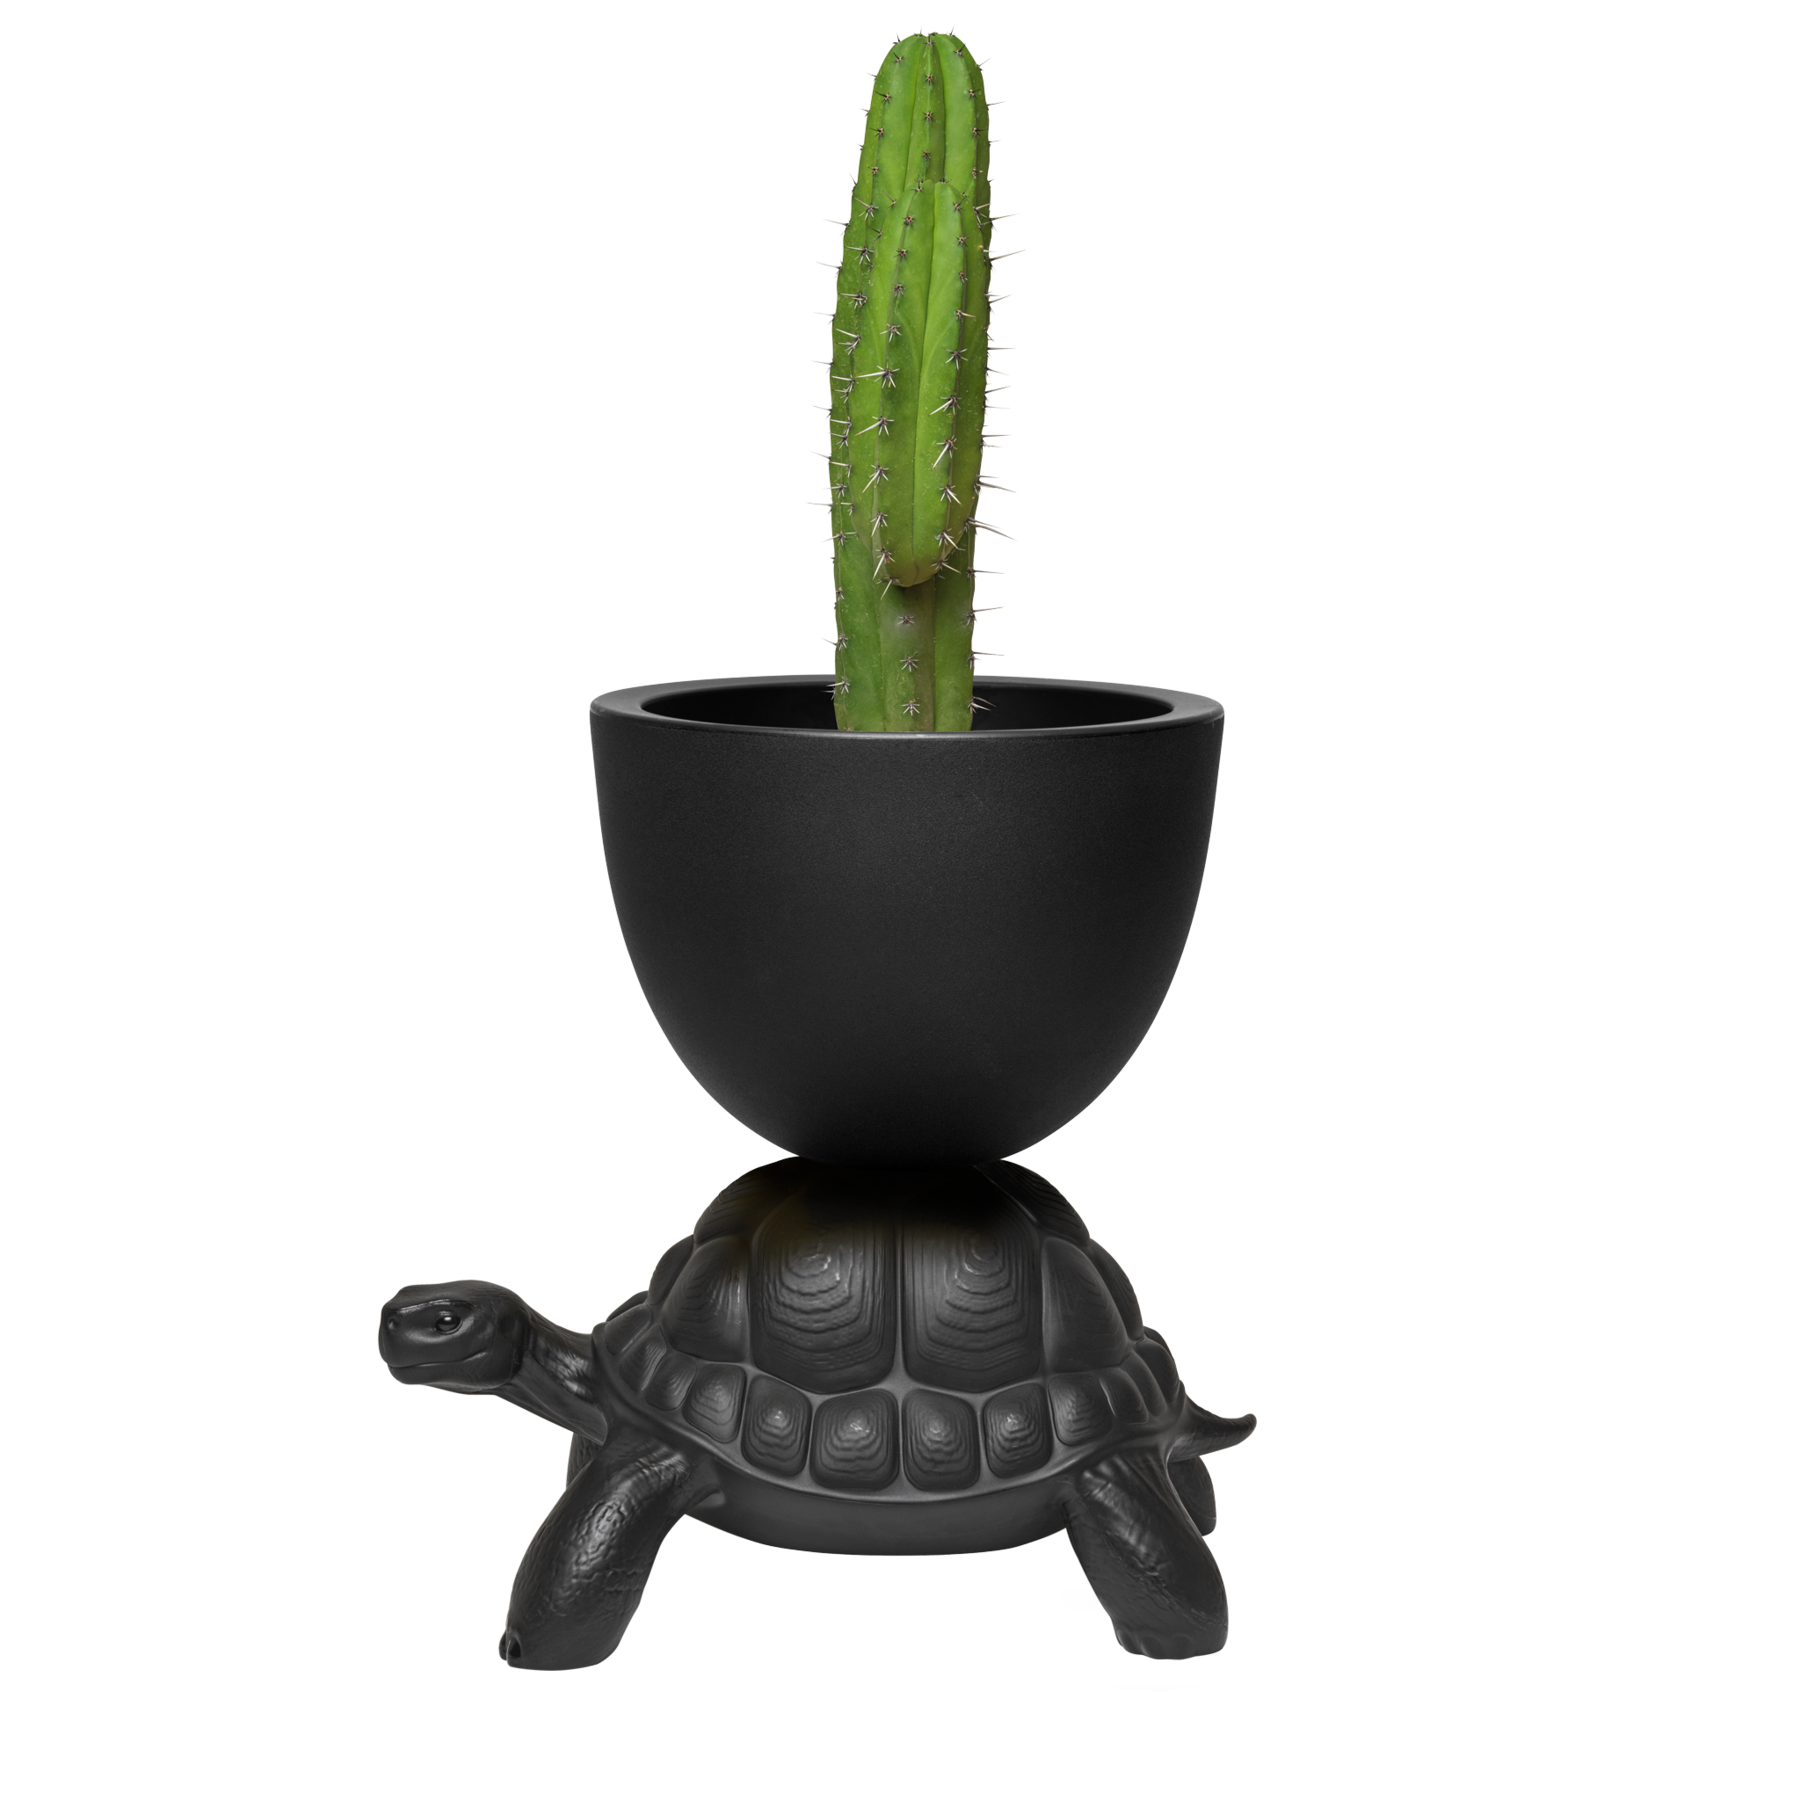 Qeeboo TURTLE Carry Planter & Champagne Cooler